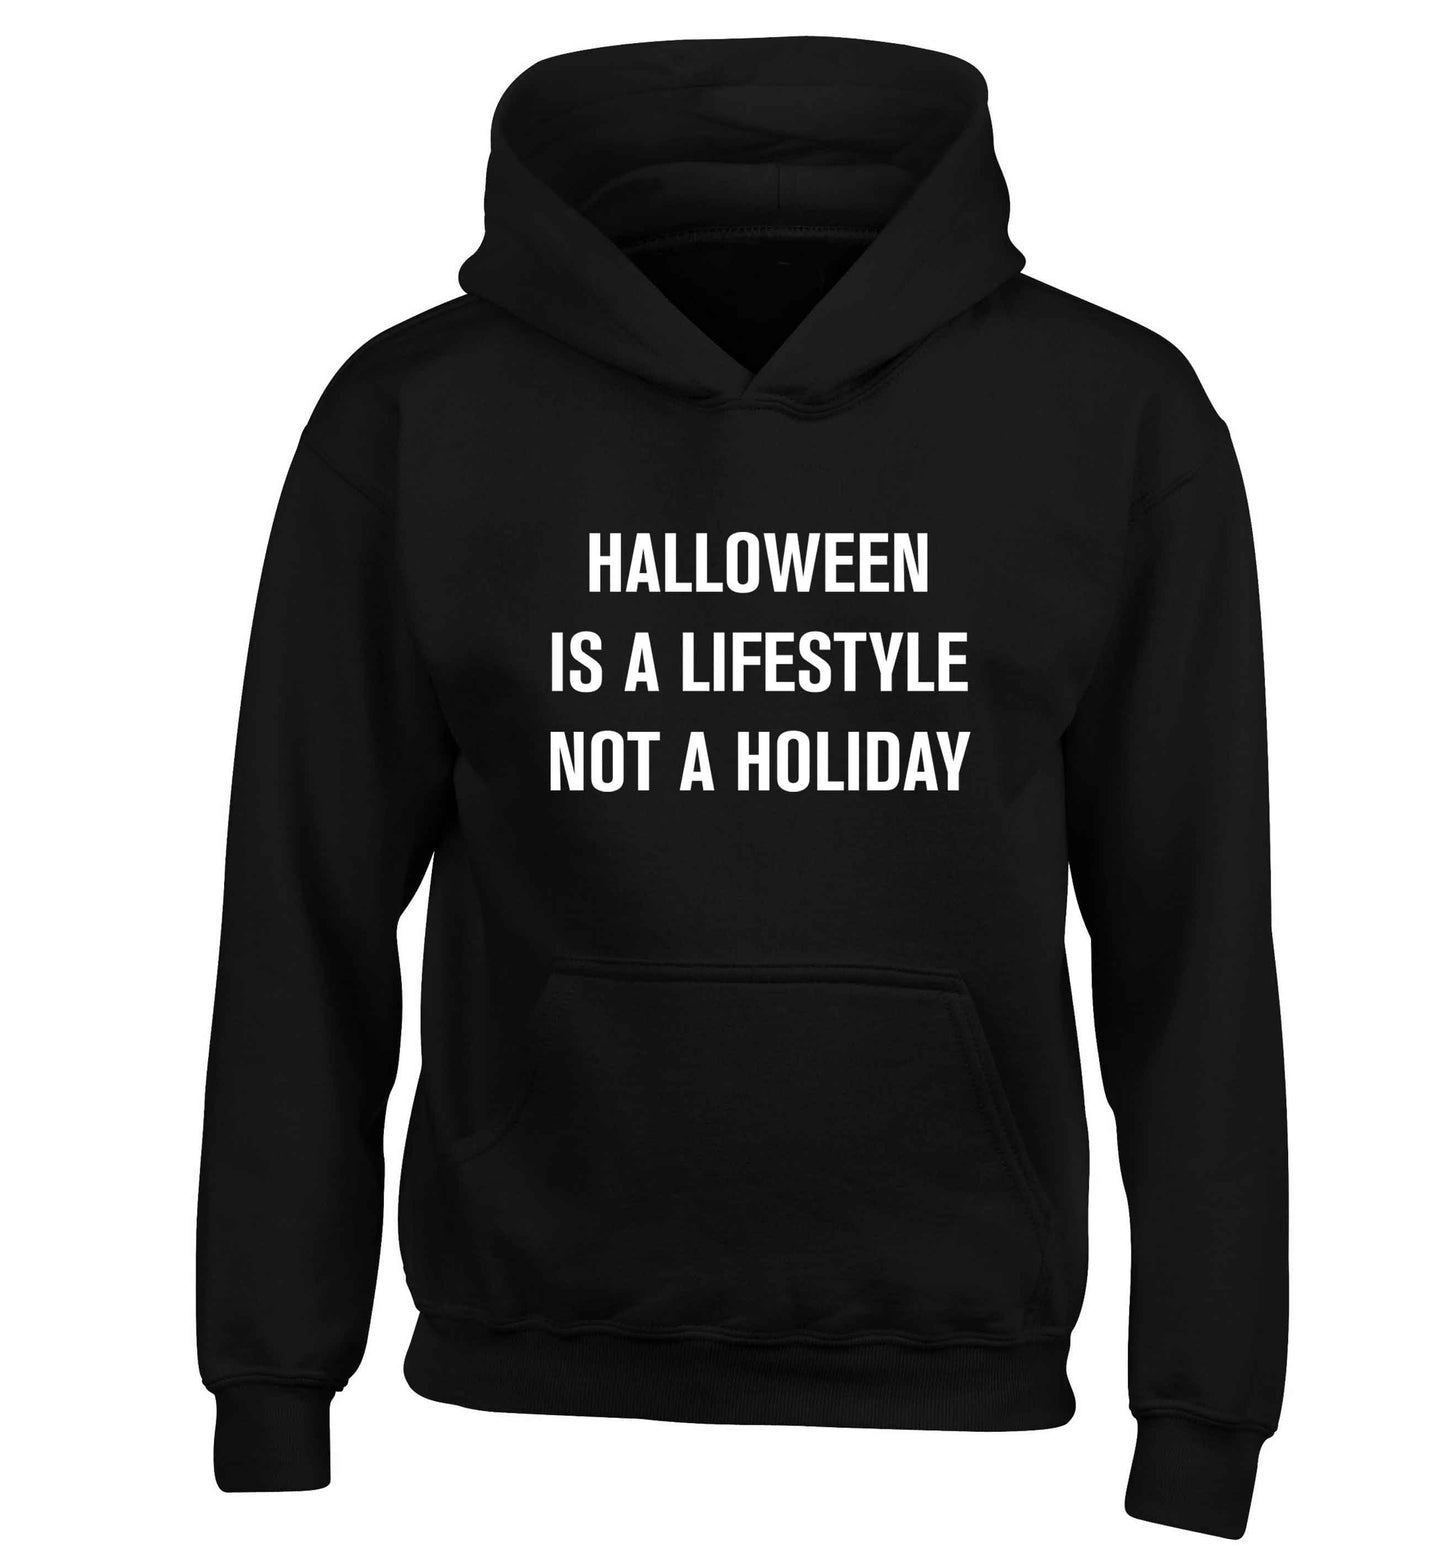 Halloween is a lifestyle not a holiday children's black hoodie 12-13 Years